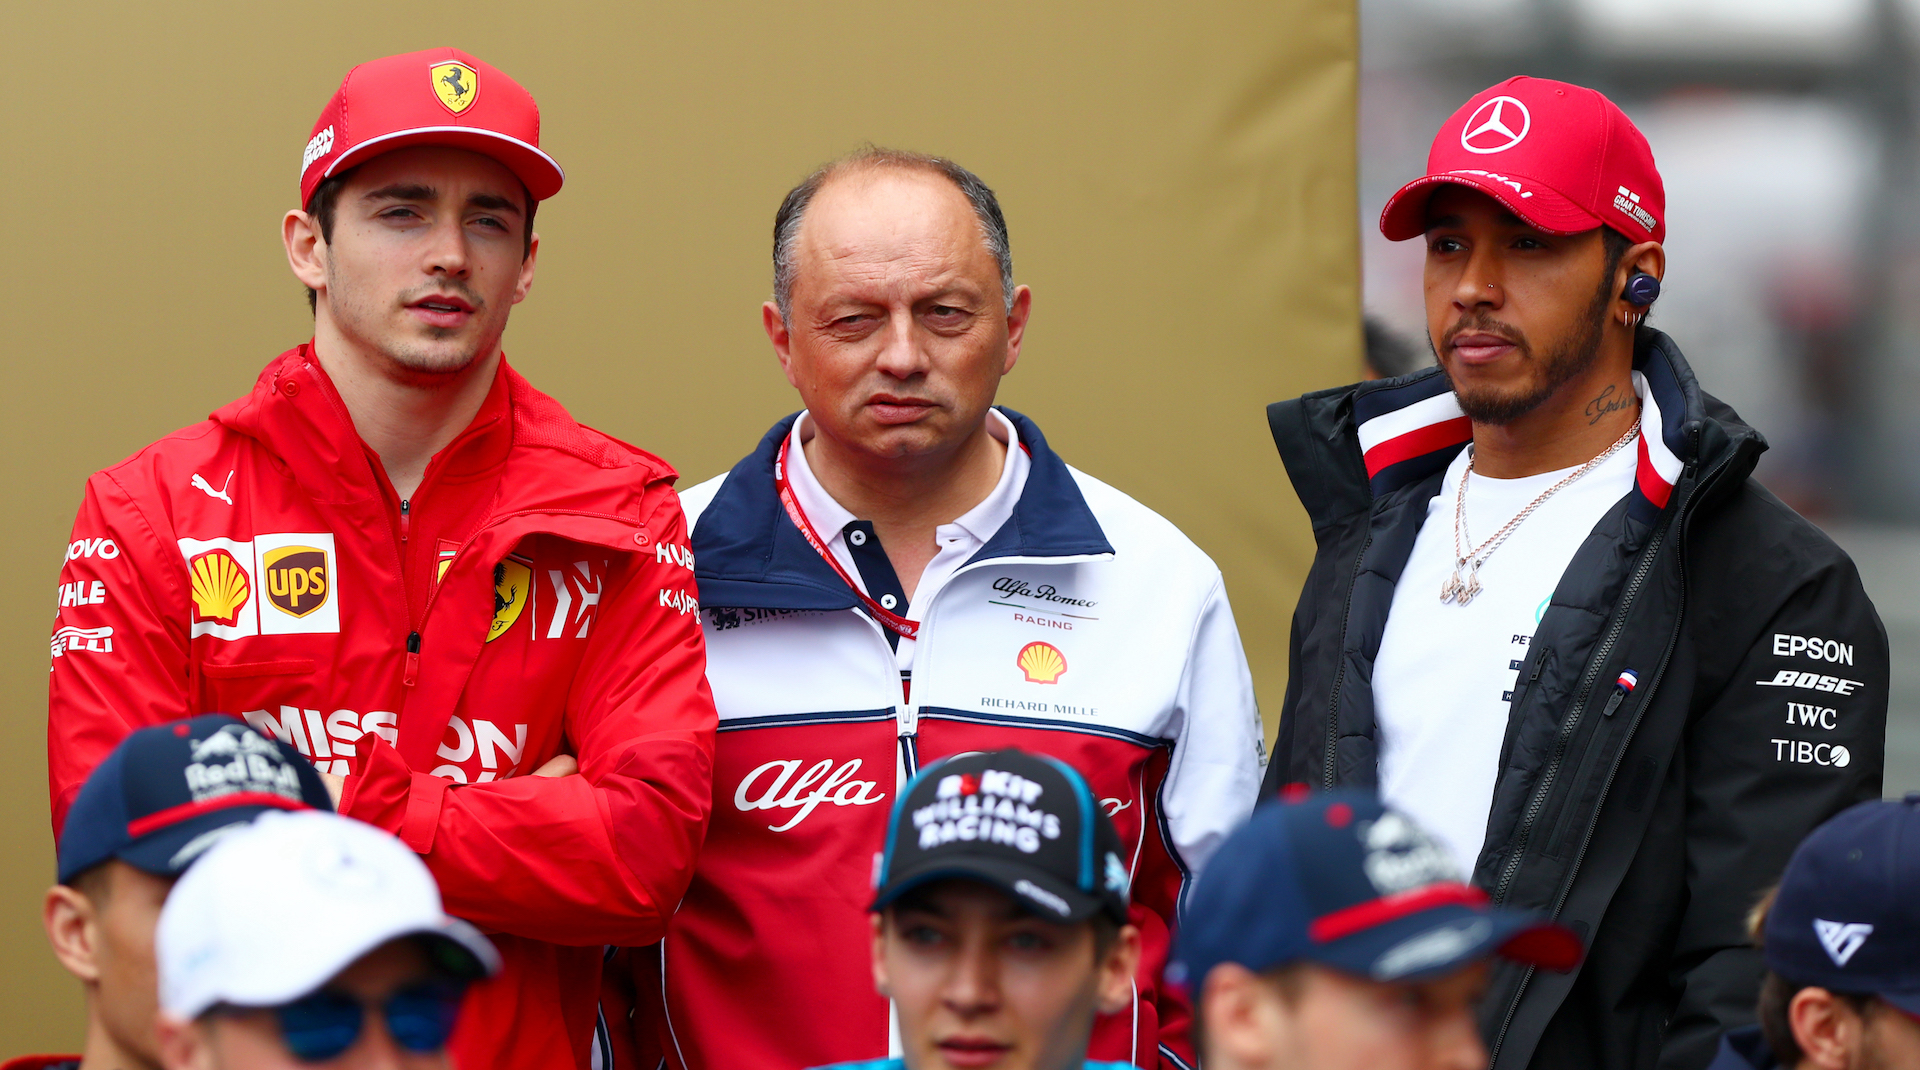 Charles Leclerc of Monaco and Ferrari, Alfa Romeo Racing Team Principal Frederic Vasseur and Lewis Hamilton of Great Britain and Mercedes GP look on before the F1 Grand Prix of China at Shanghai International Circuit on April 14, 2019 in Shanghai, China.